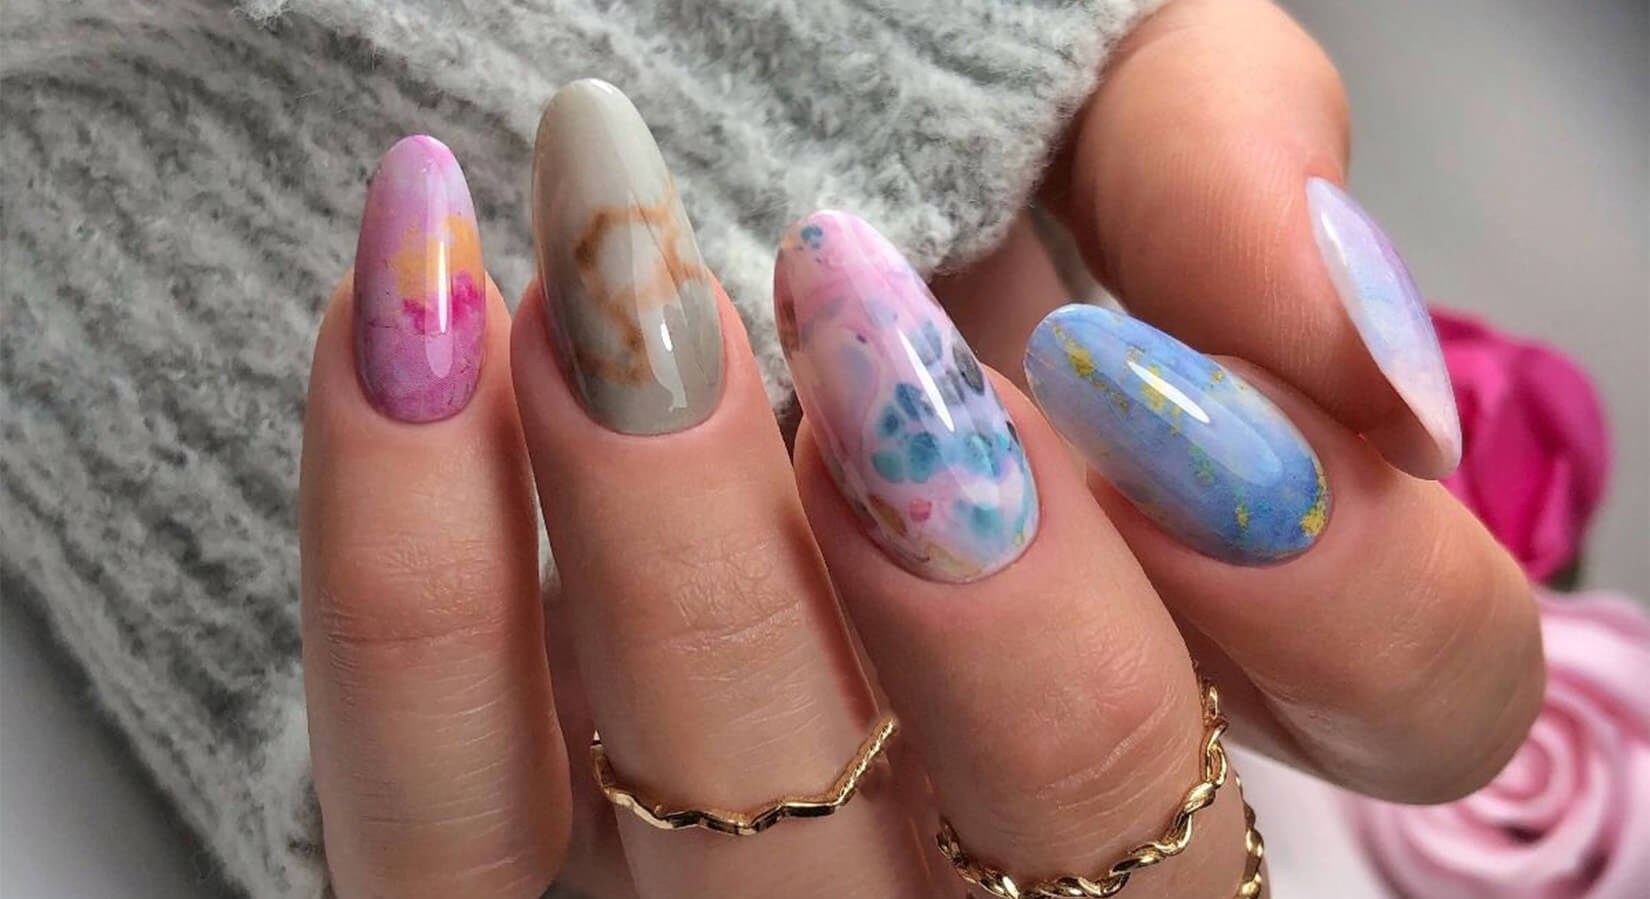 Marble nail🌸 | Gallery posted by Pr3tty | Lemon8